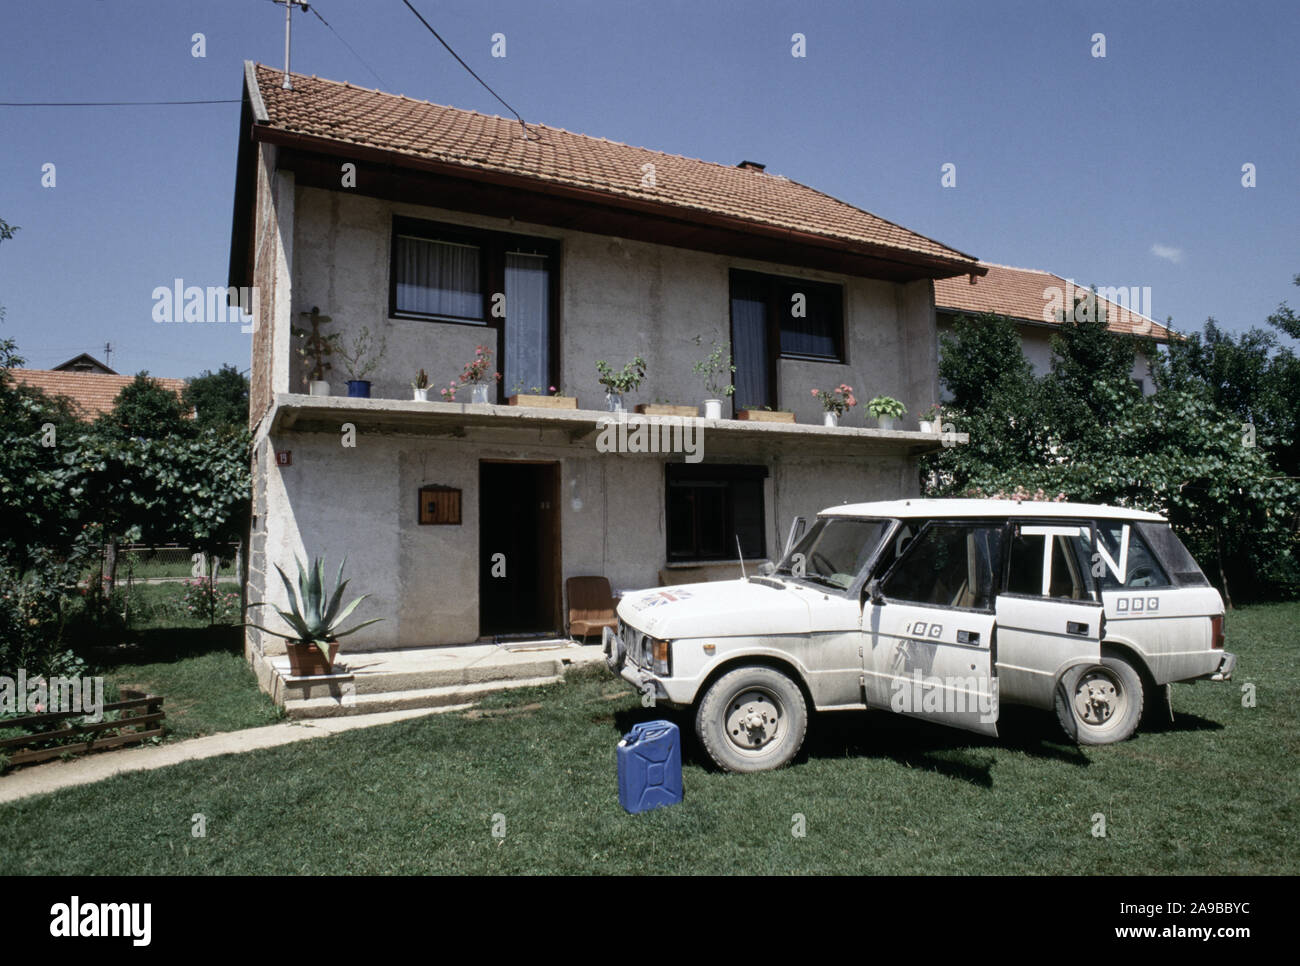 9th July 1993 During the war in Bosnia: the rented house of American broadcaster ABC News in Bila, near Vitez, close to the British Army base. The armoured Range Rover with BBC livery was also rented by ABC. Stock Photo